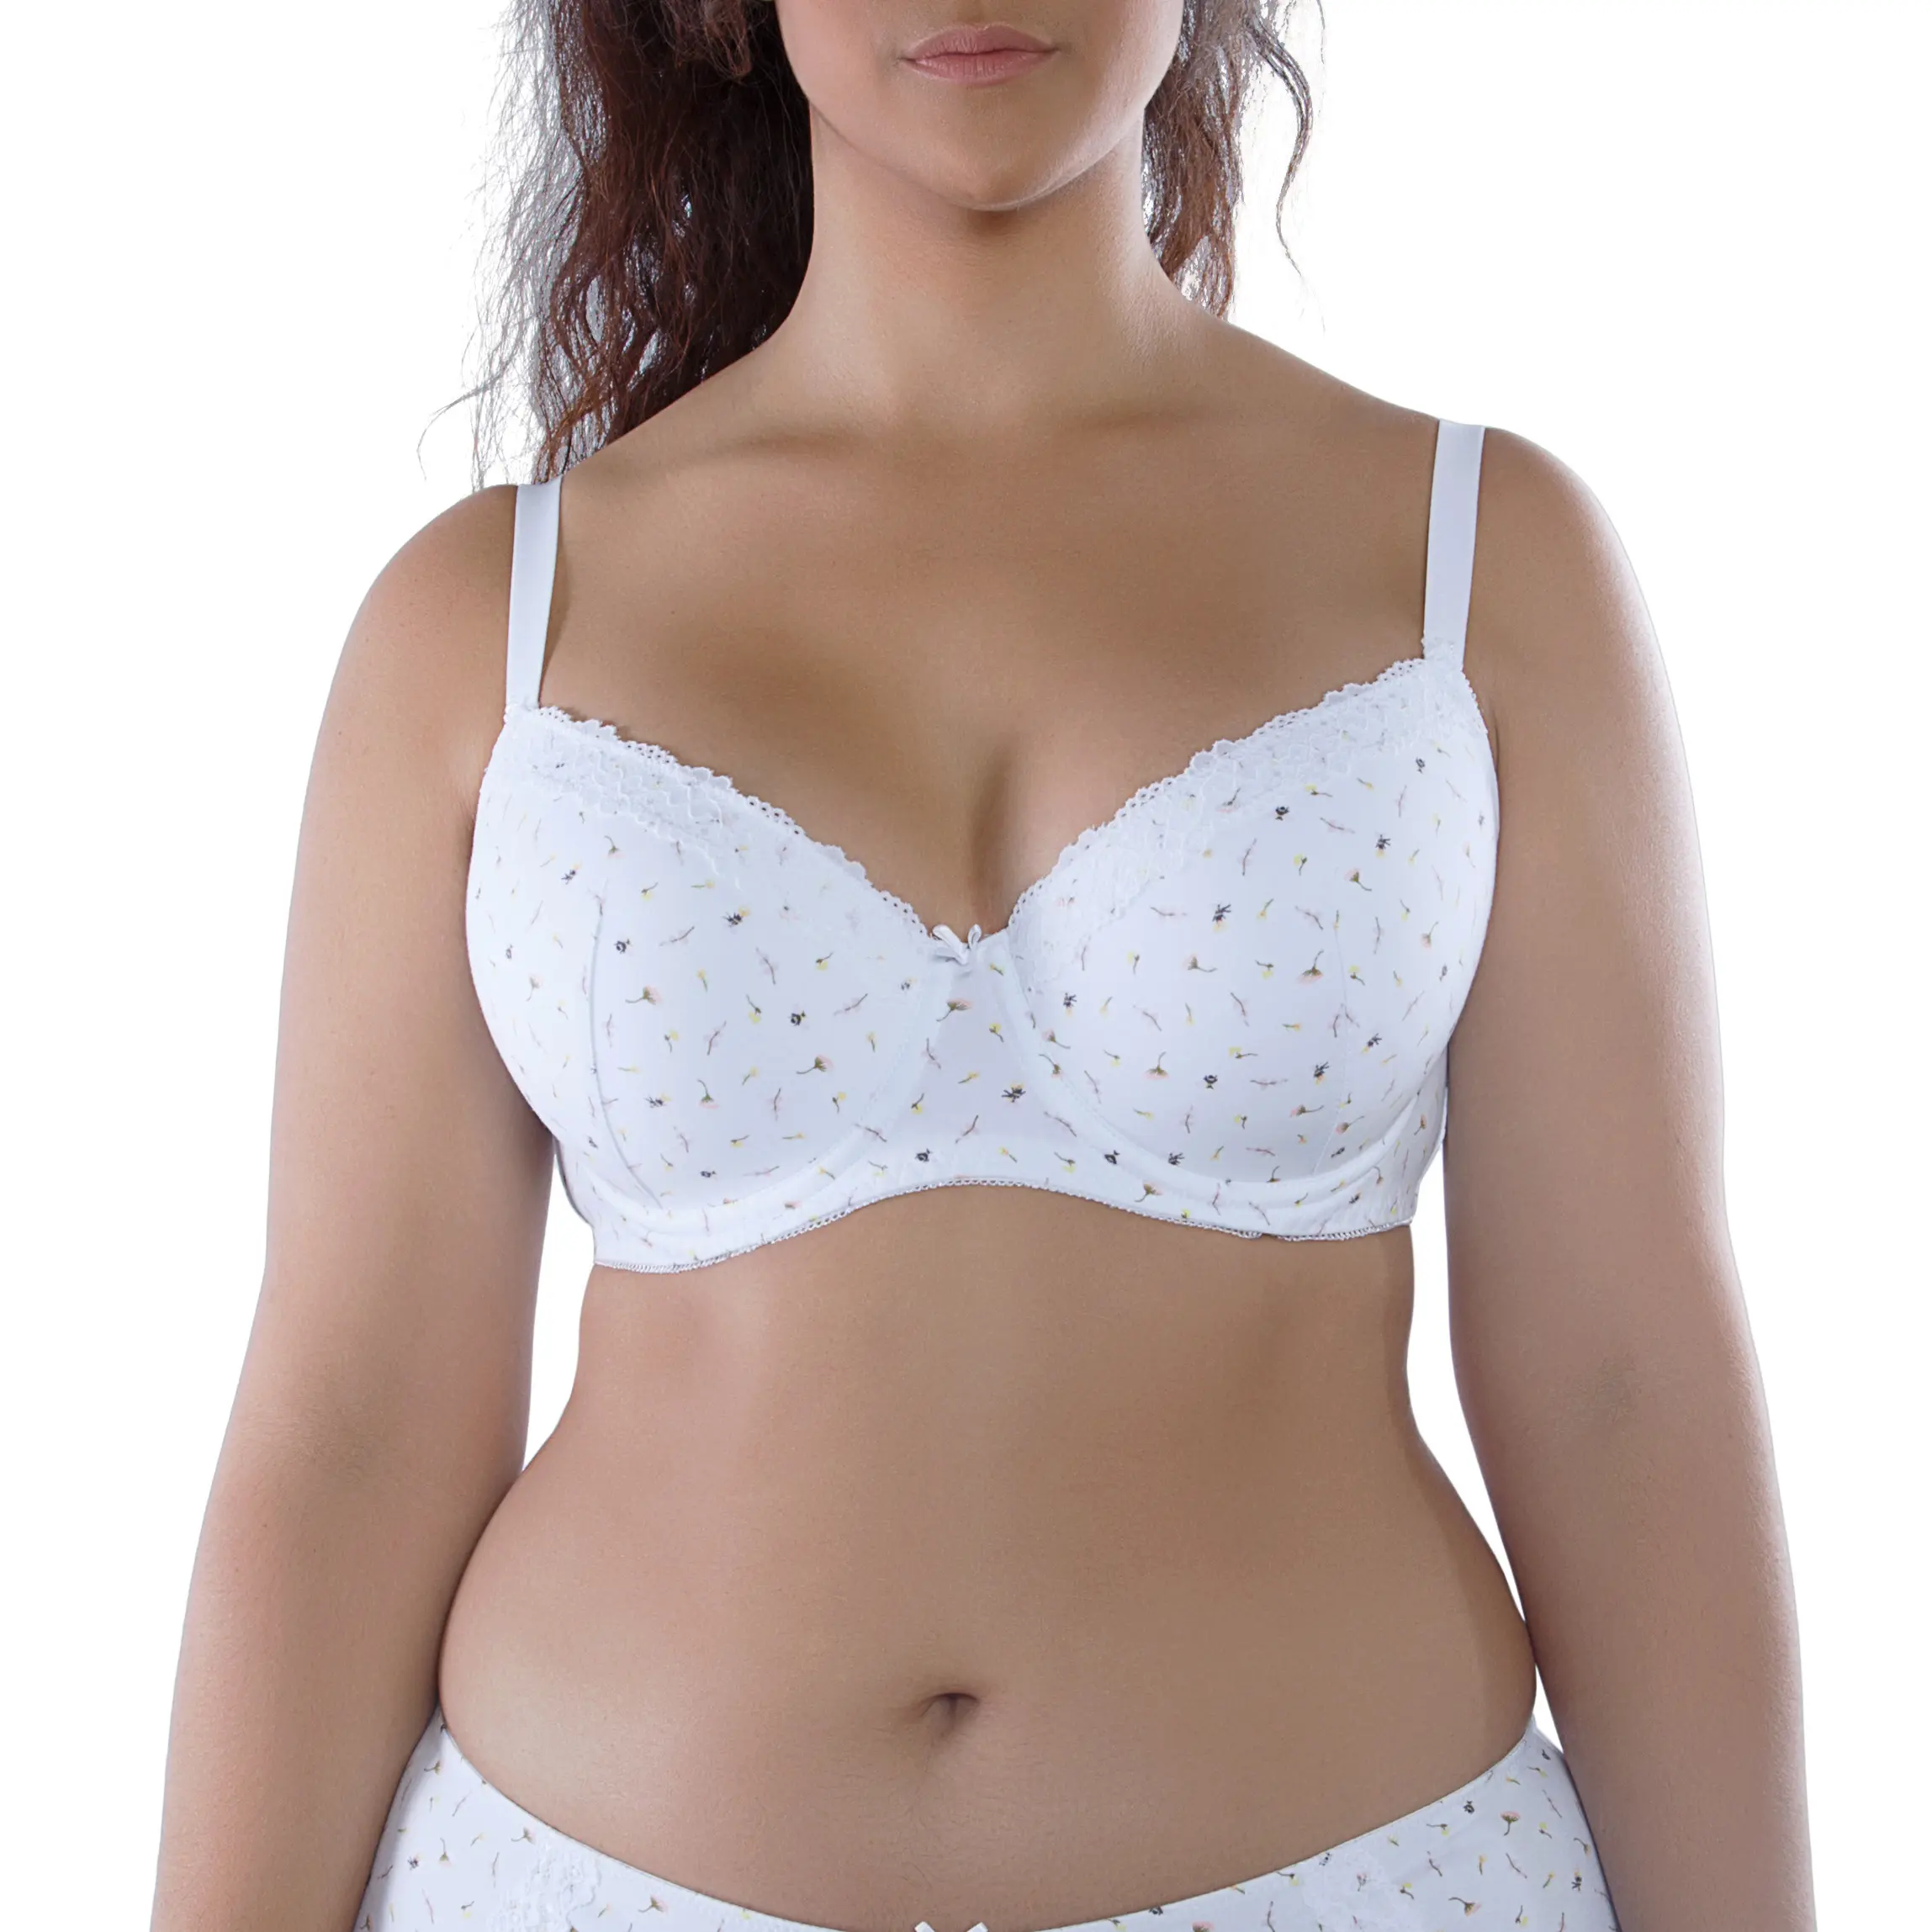 Lace Full Cup Underwire Plus Size Lace Padded Large Bra Plus Size Bras for Women Cotton Bra Big Size